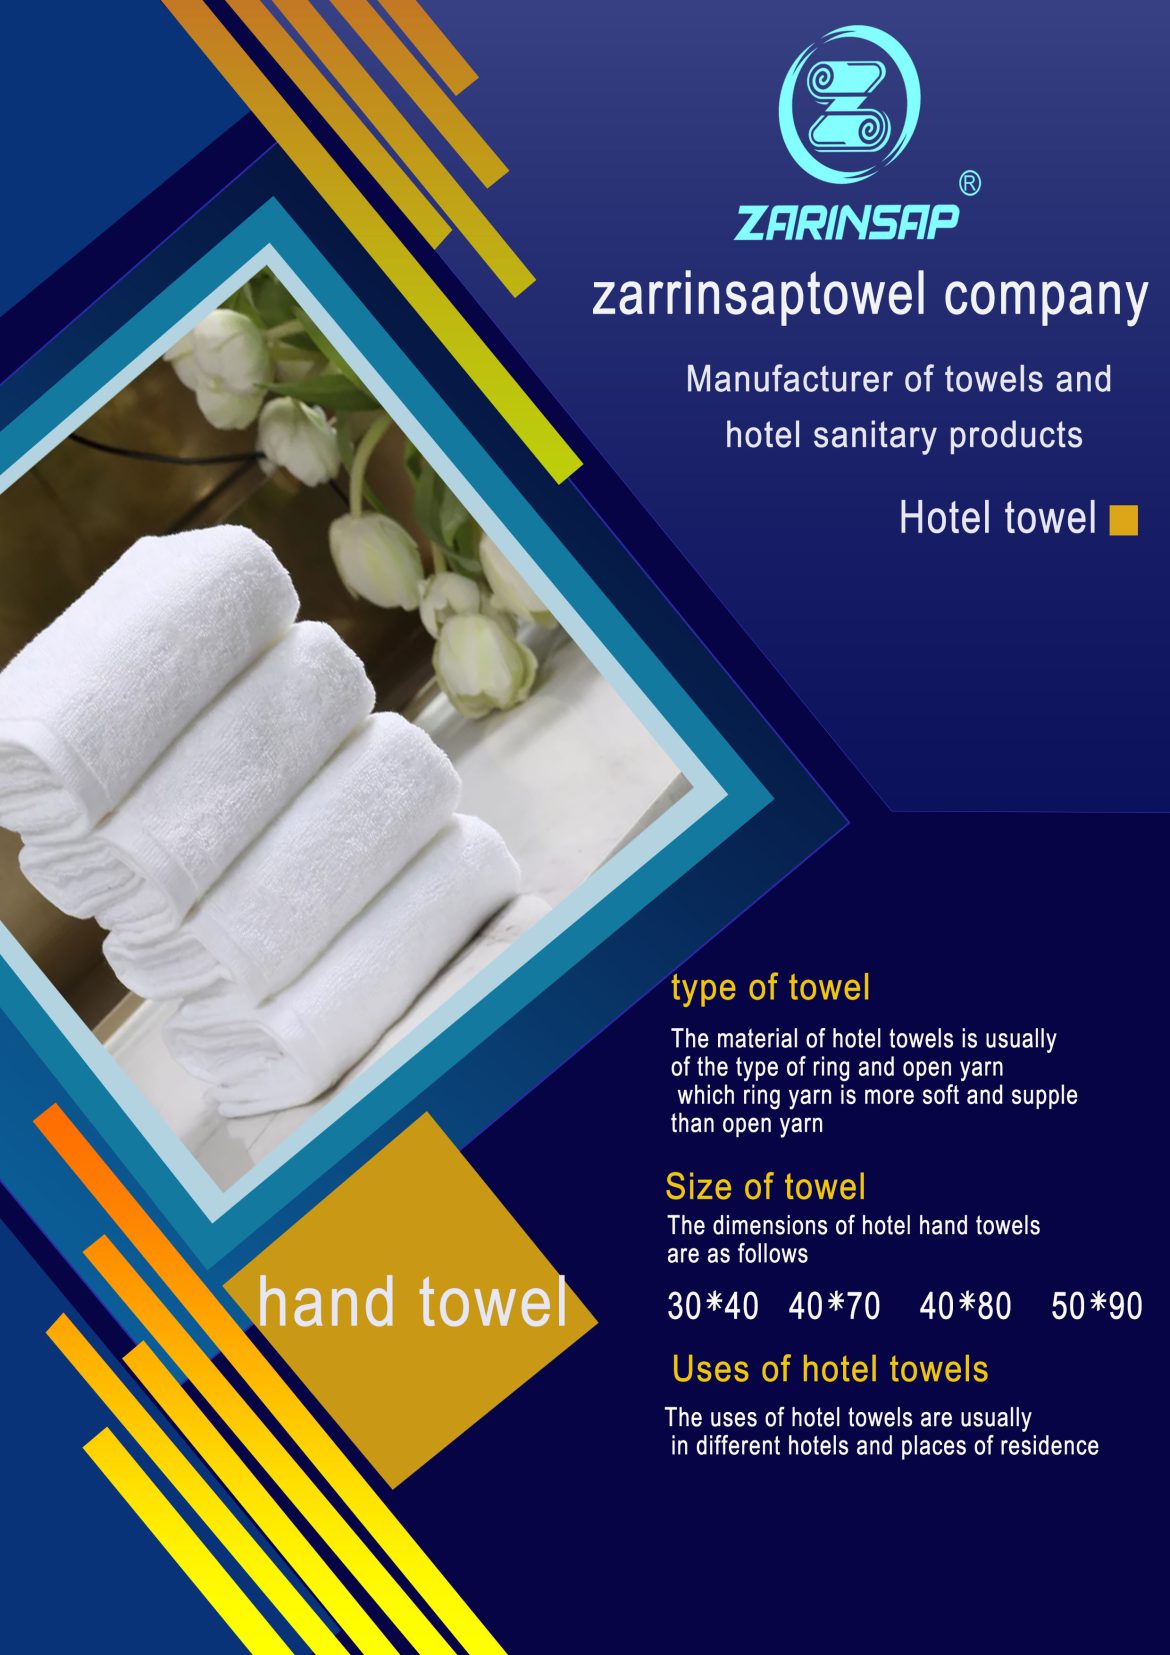 Production of hotel towels in different types